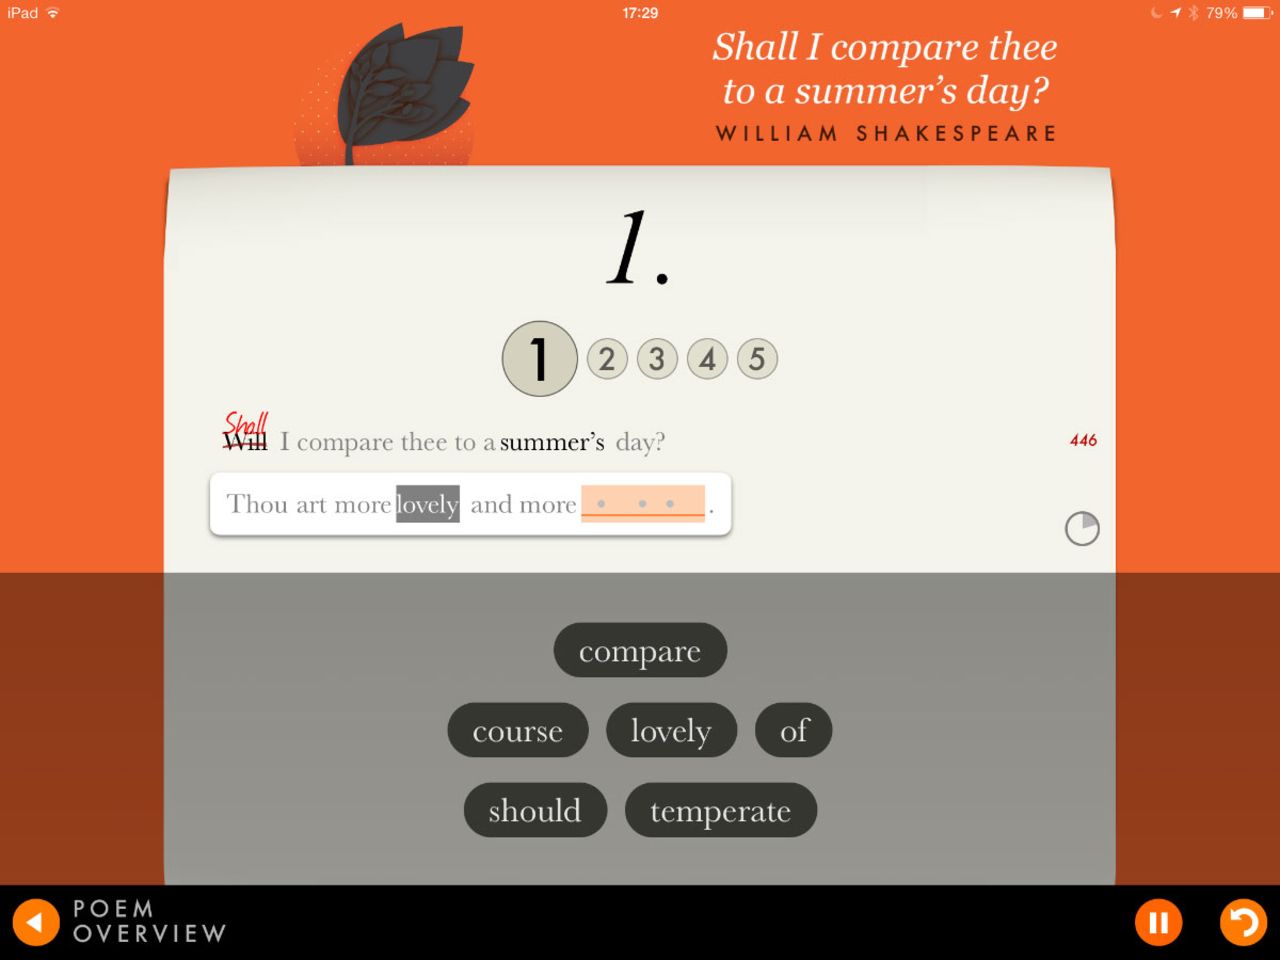 Another Inkle feature helps users to learn and understand Penguin Classic poems. 